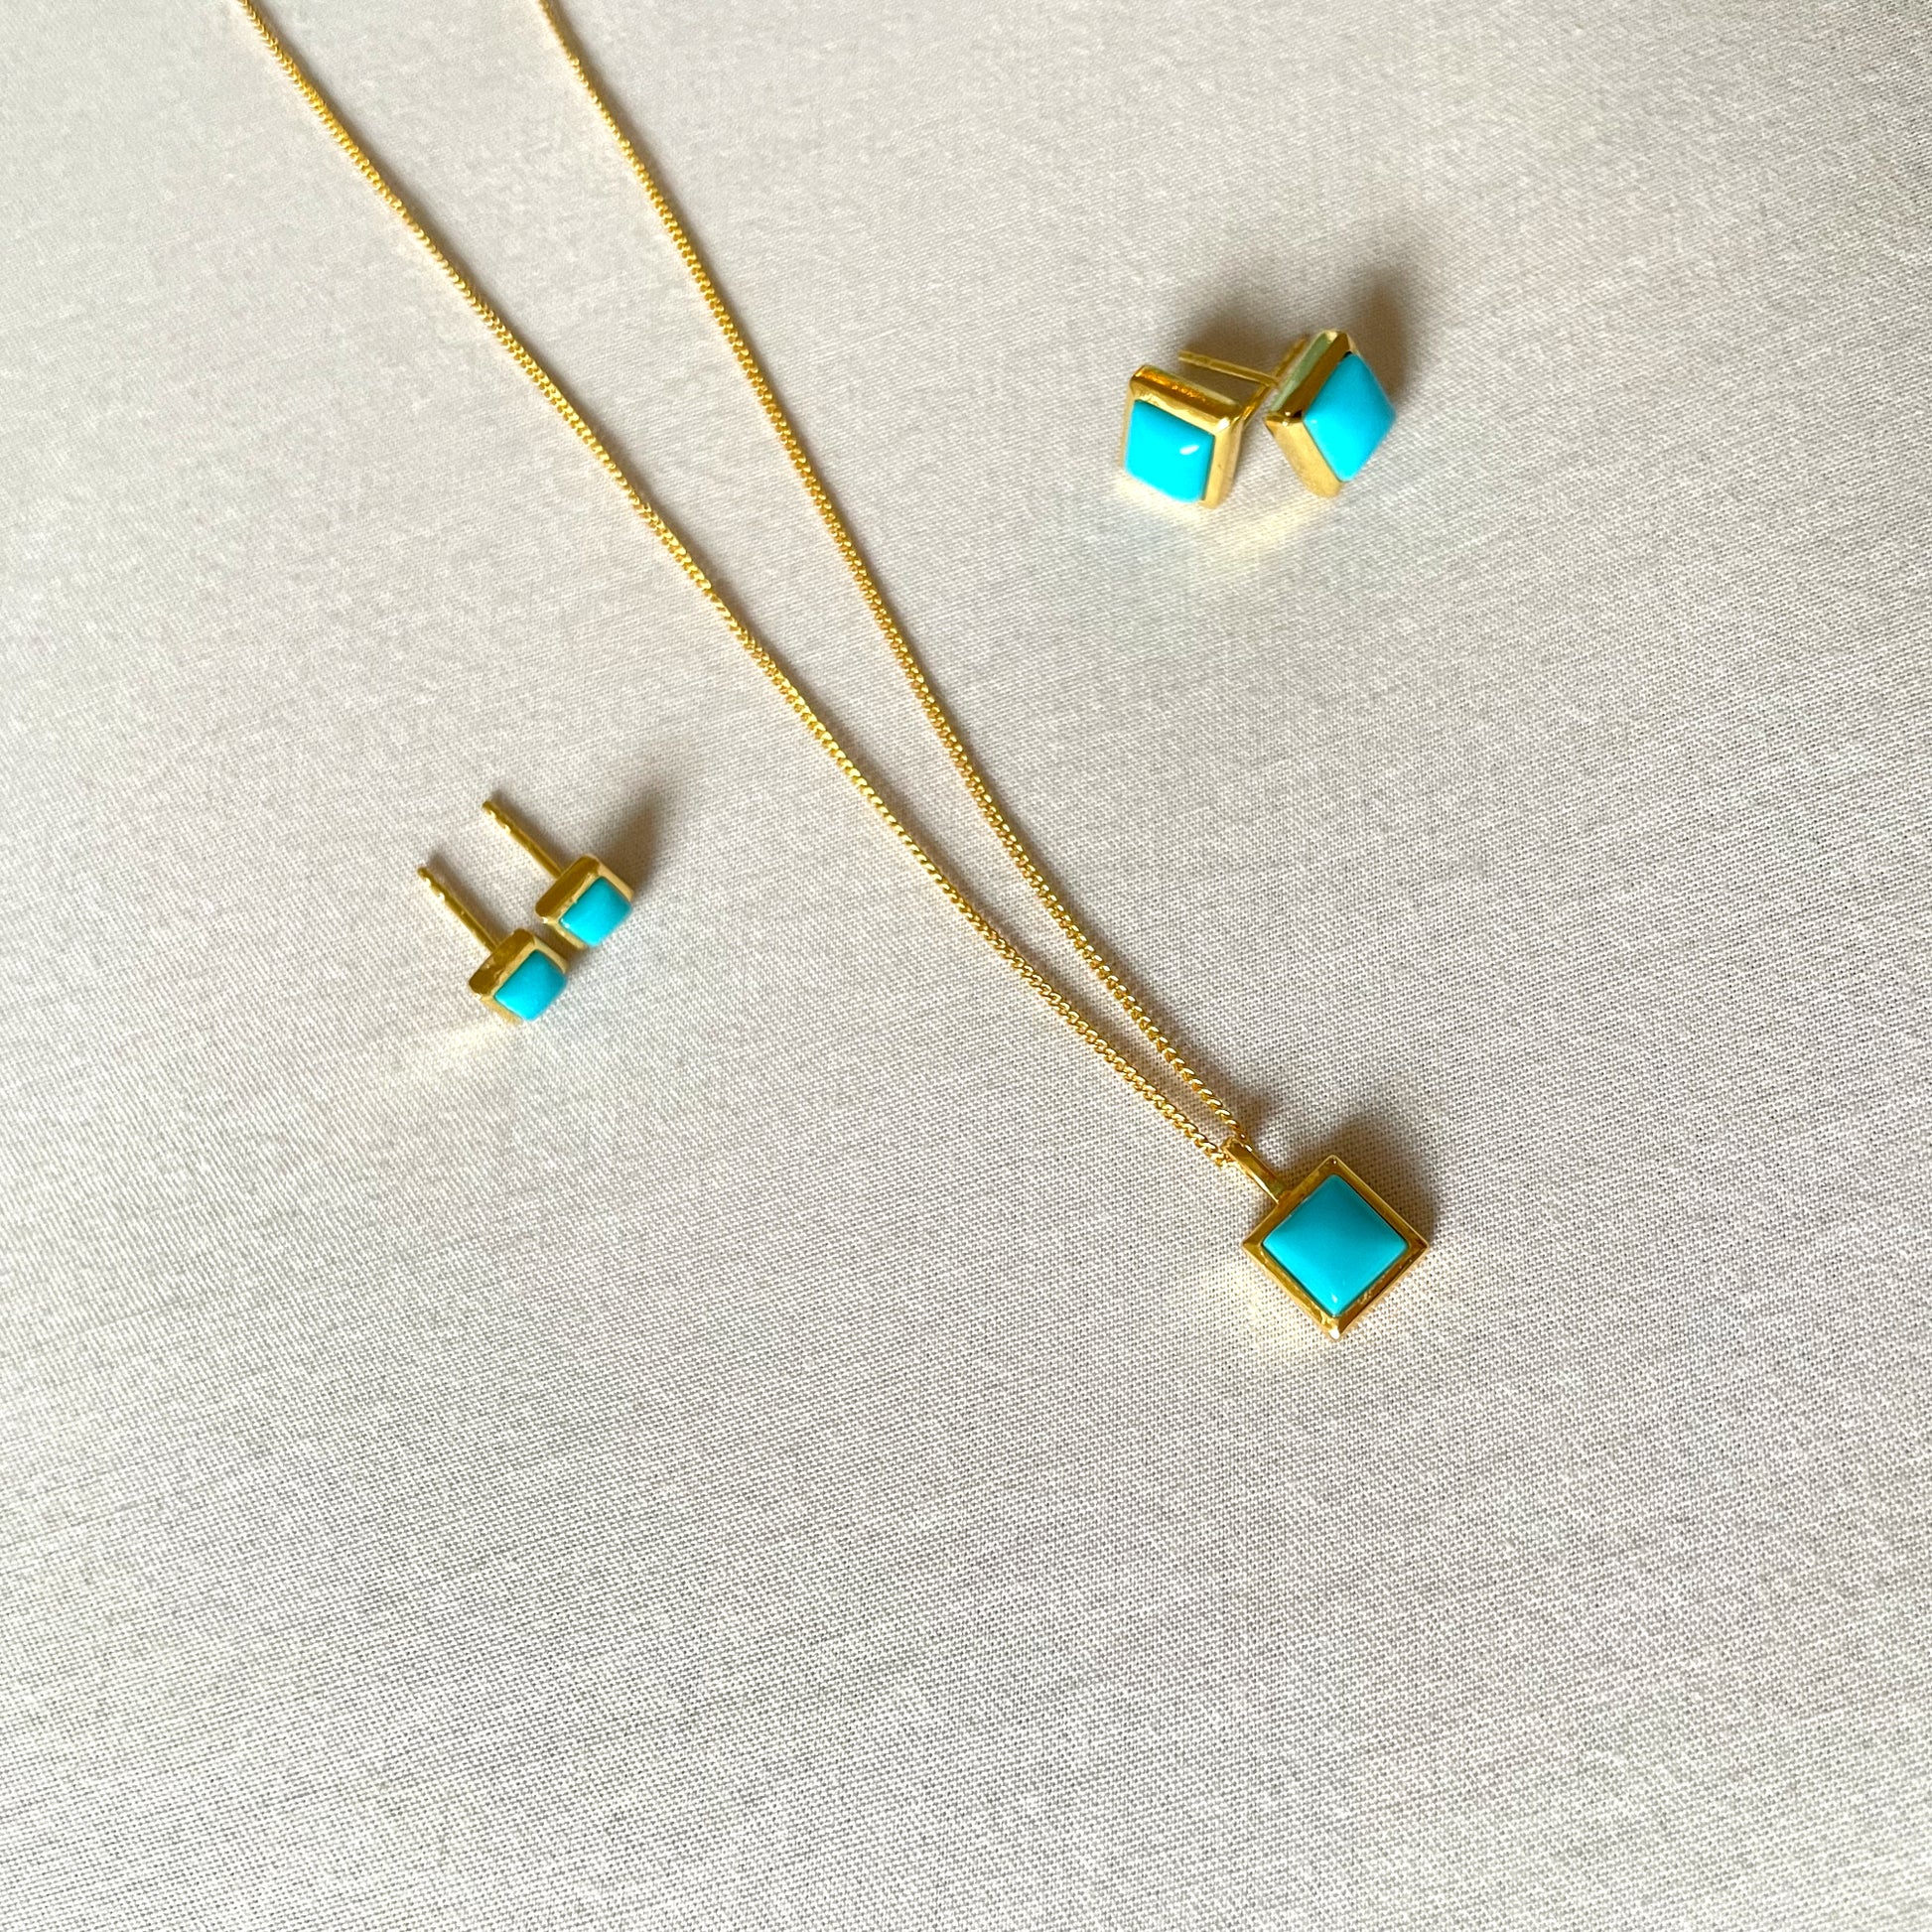 Turquoise Gold Earrings, Crystal Earrings, Gold Plated on 925 Sterling Silver, handmade gemstone earrings, Turquoise Studs Unique Gift, turquoise stud earrings, gemstones, gold studs, Crystal, Christmas gift ideas, small business, london, dainty stud